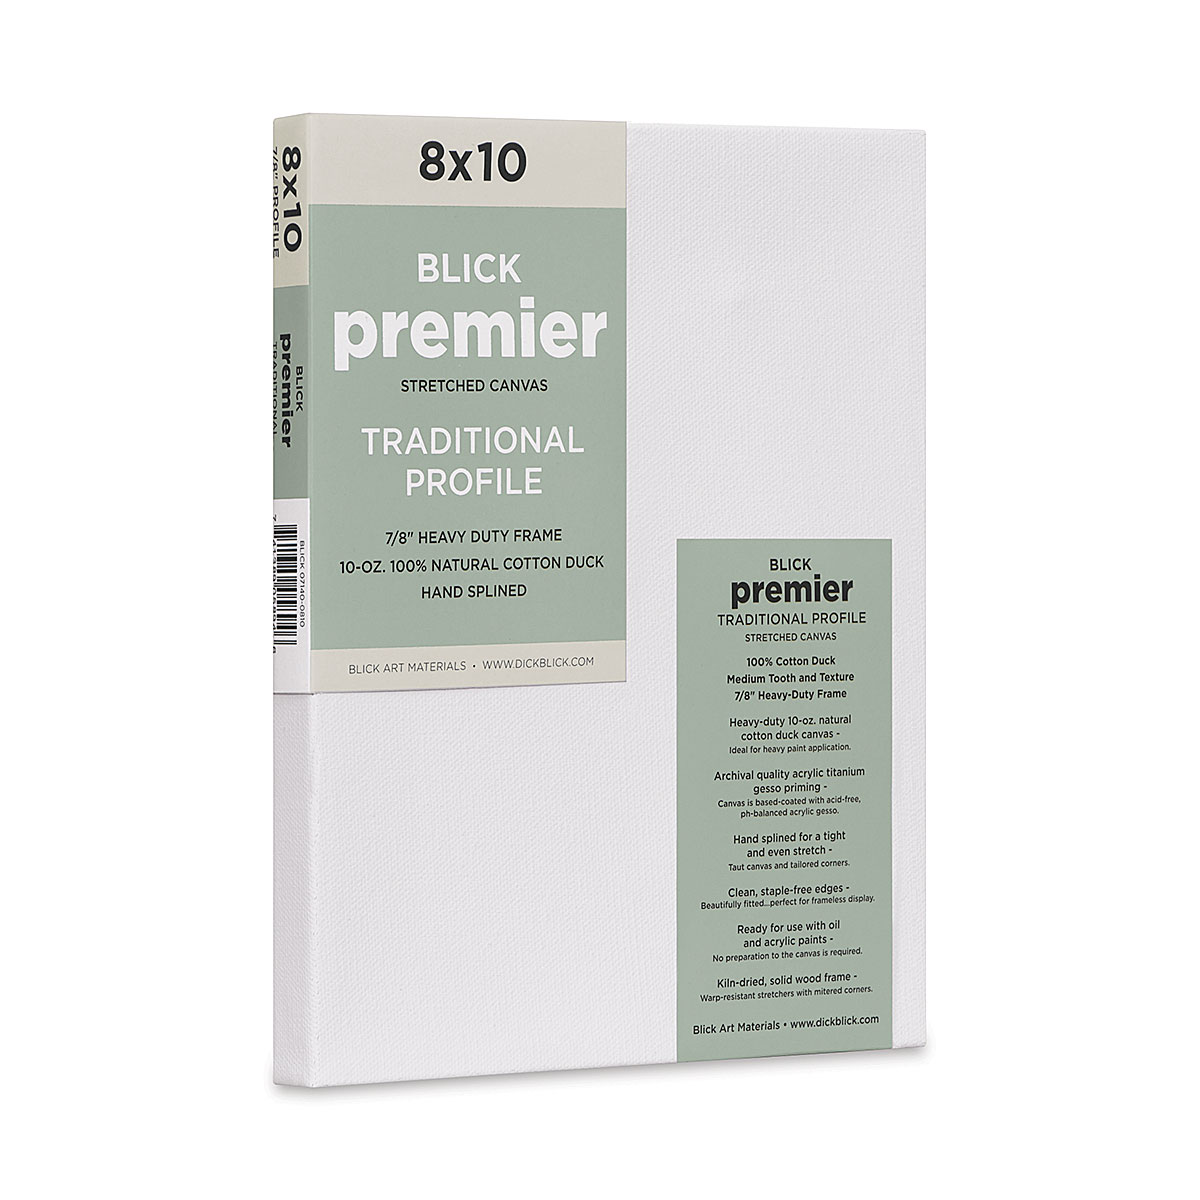 Blick Premier Stretched Cotton Canvas - Gallery Profile, Back-Stapled, 60 x 72, Pkg of 5